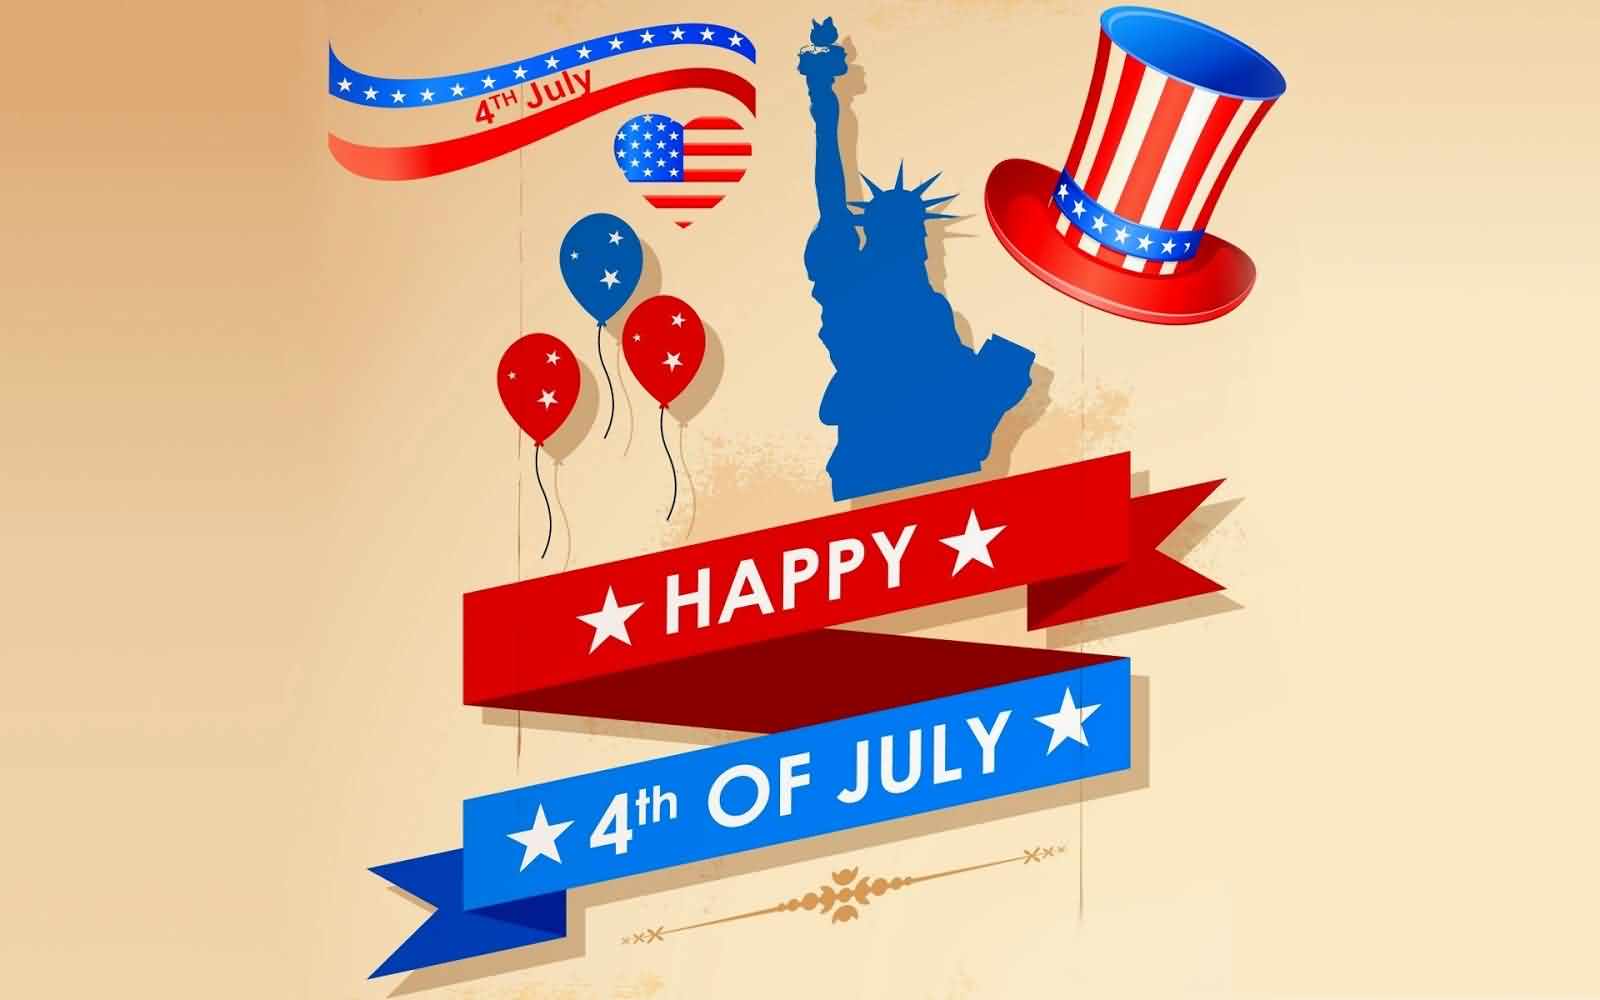 Declaration of Independence 241 years ago on July 4, 1776 Greetings Message Image